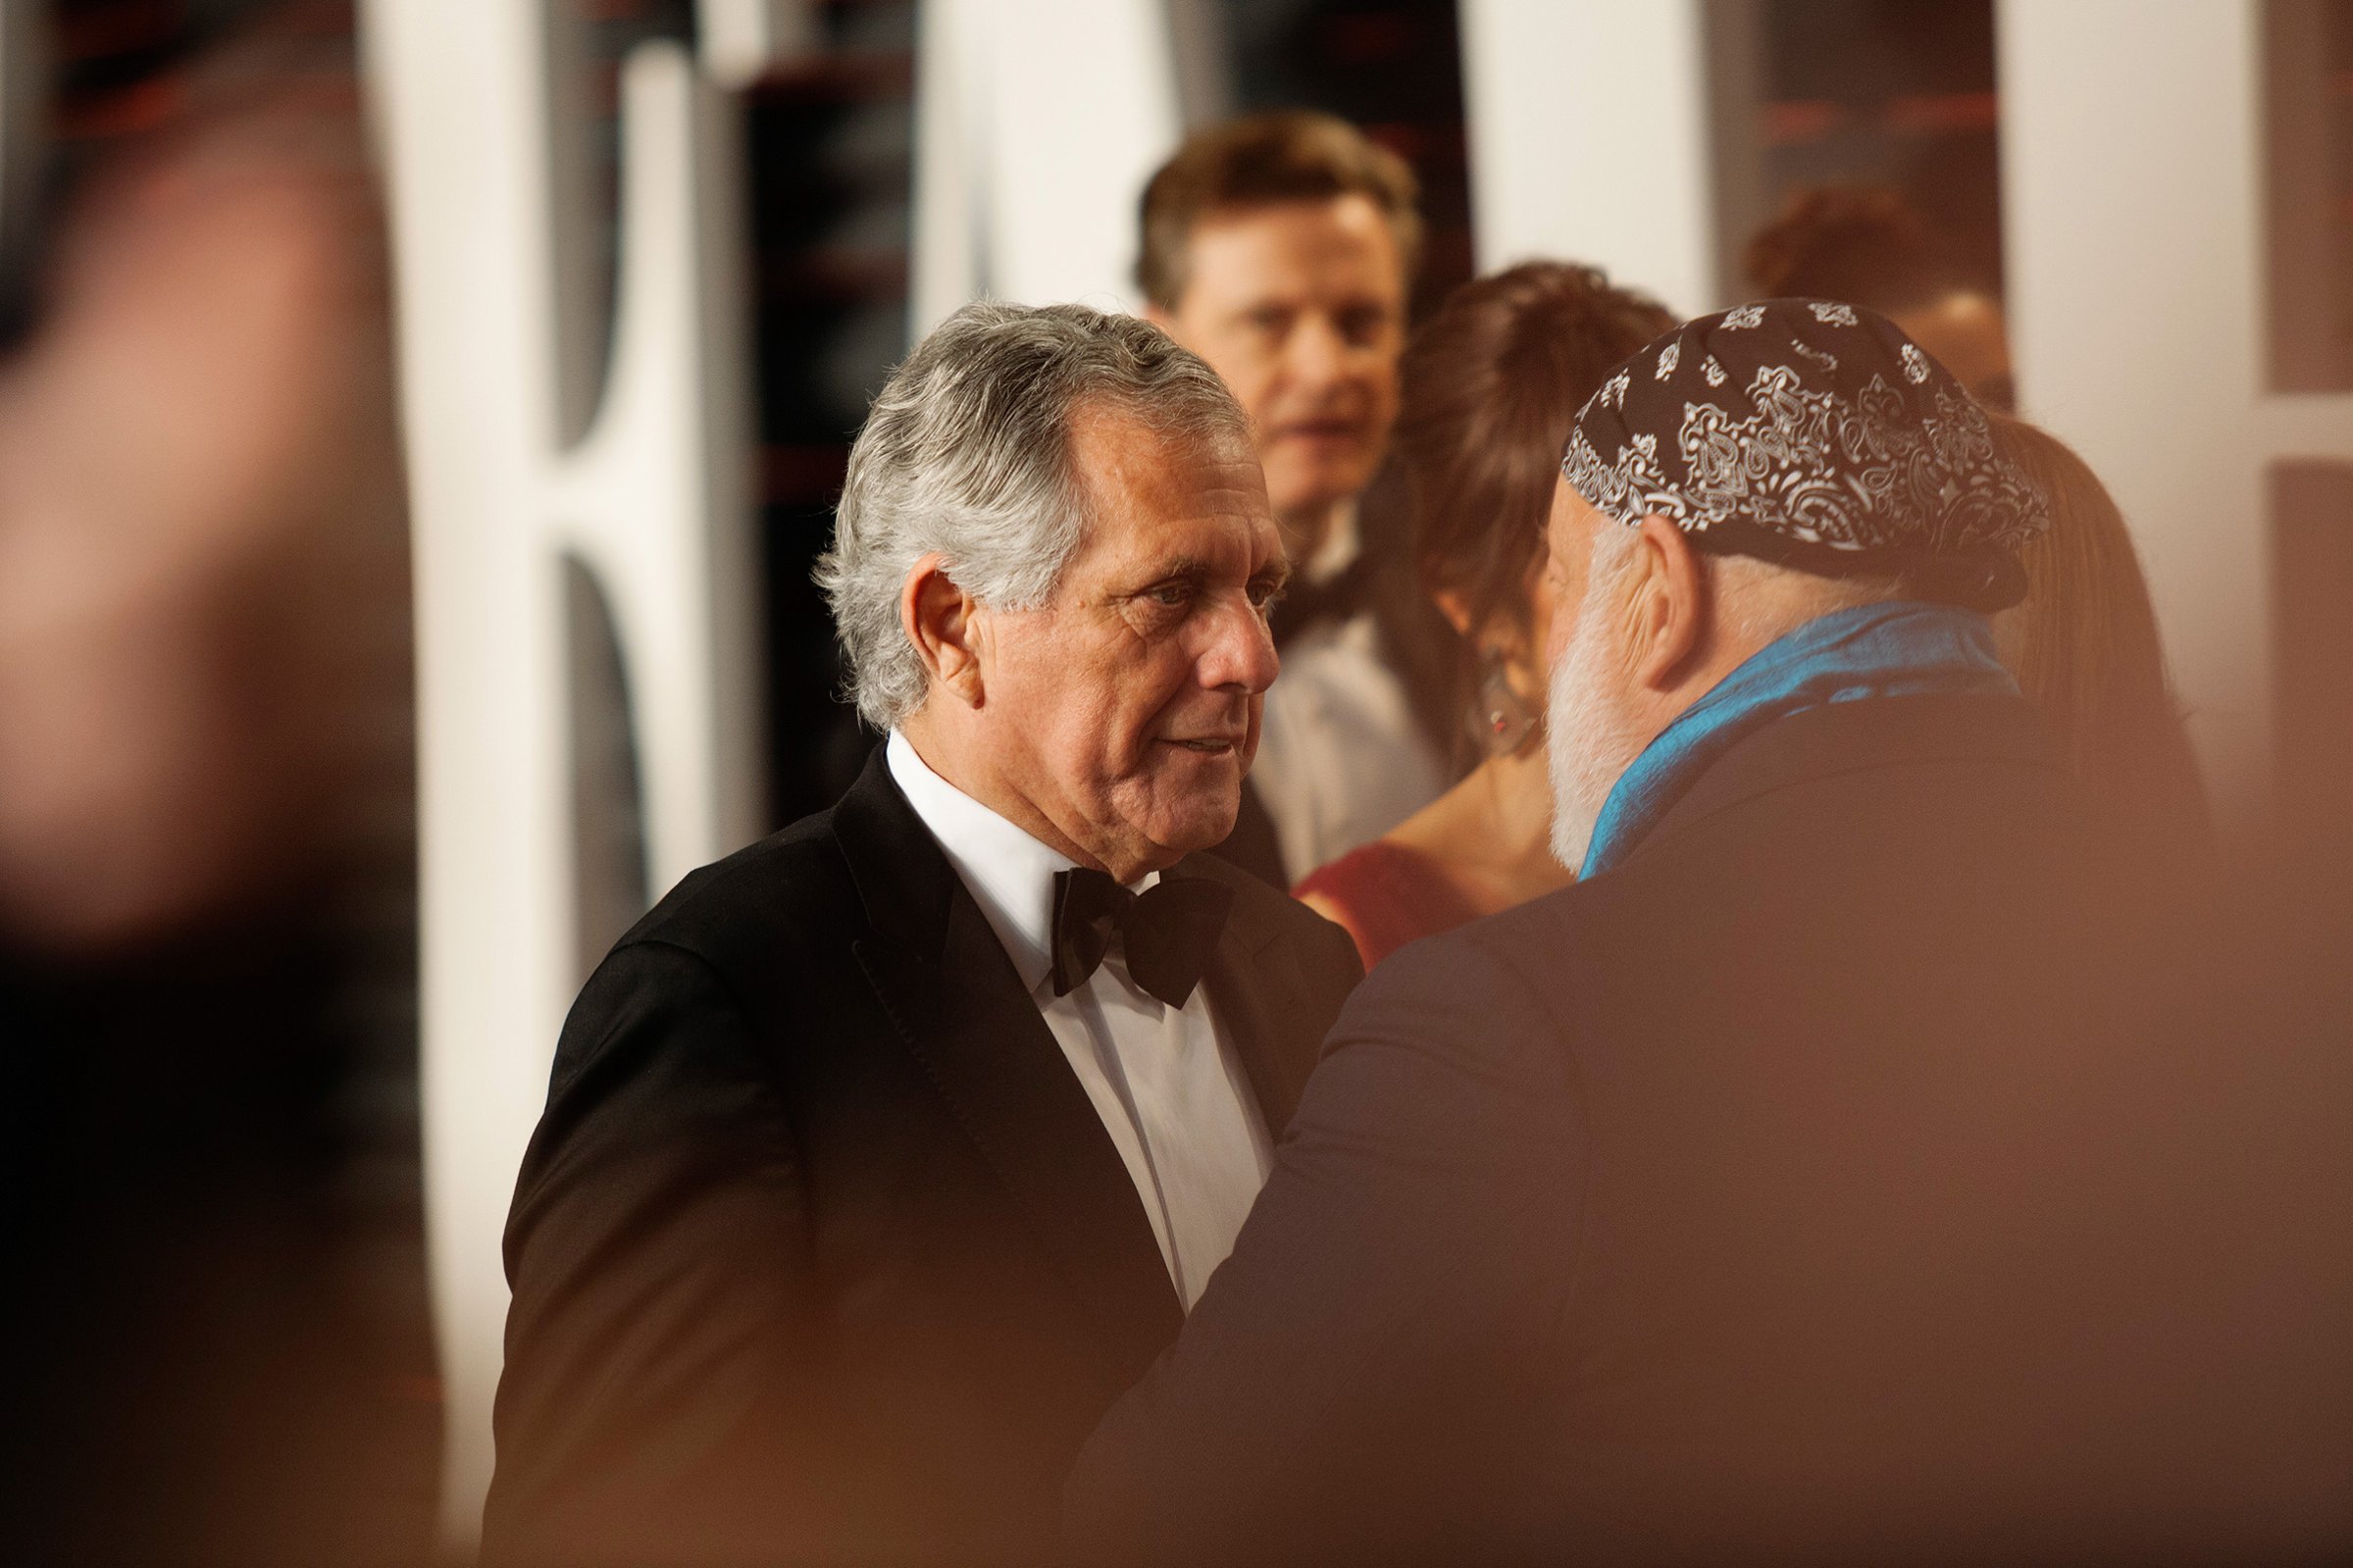 Les Moonves CBS Sexual Assault Allegations